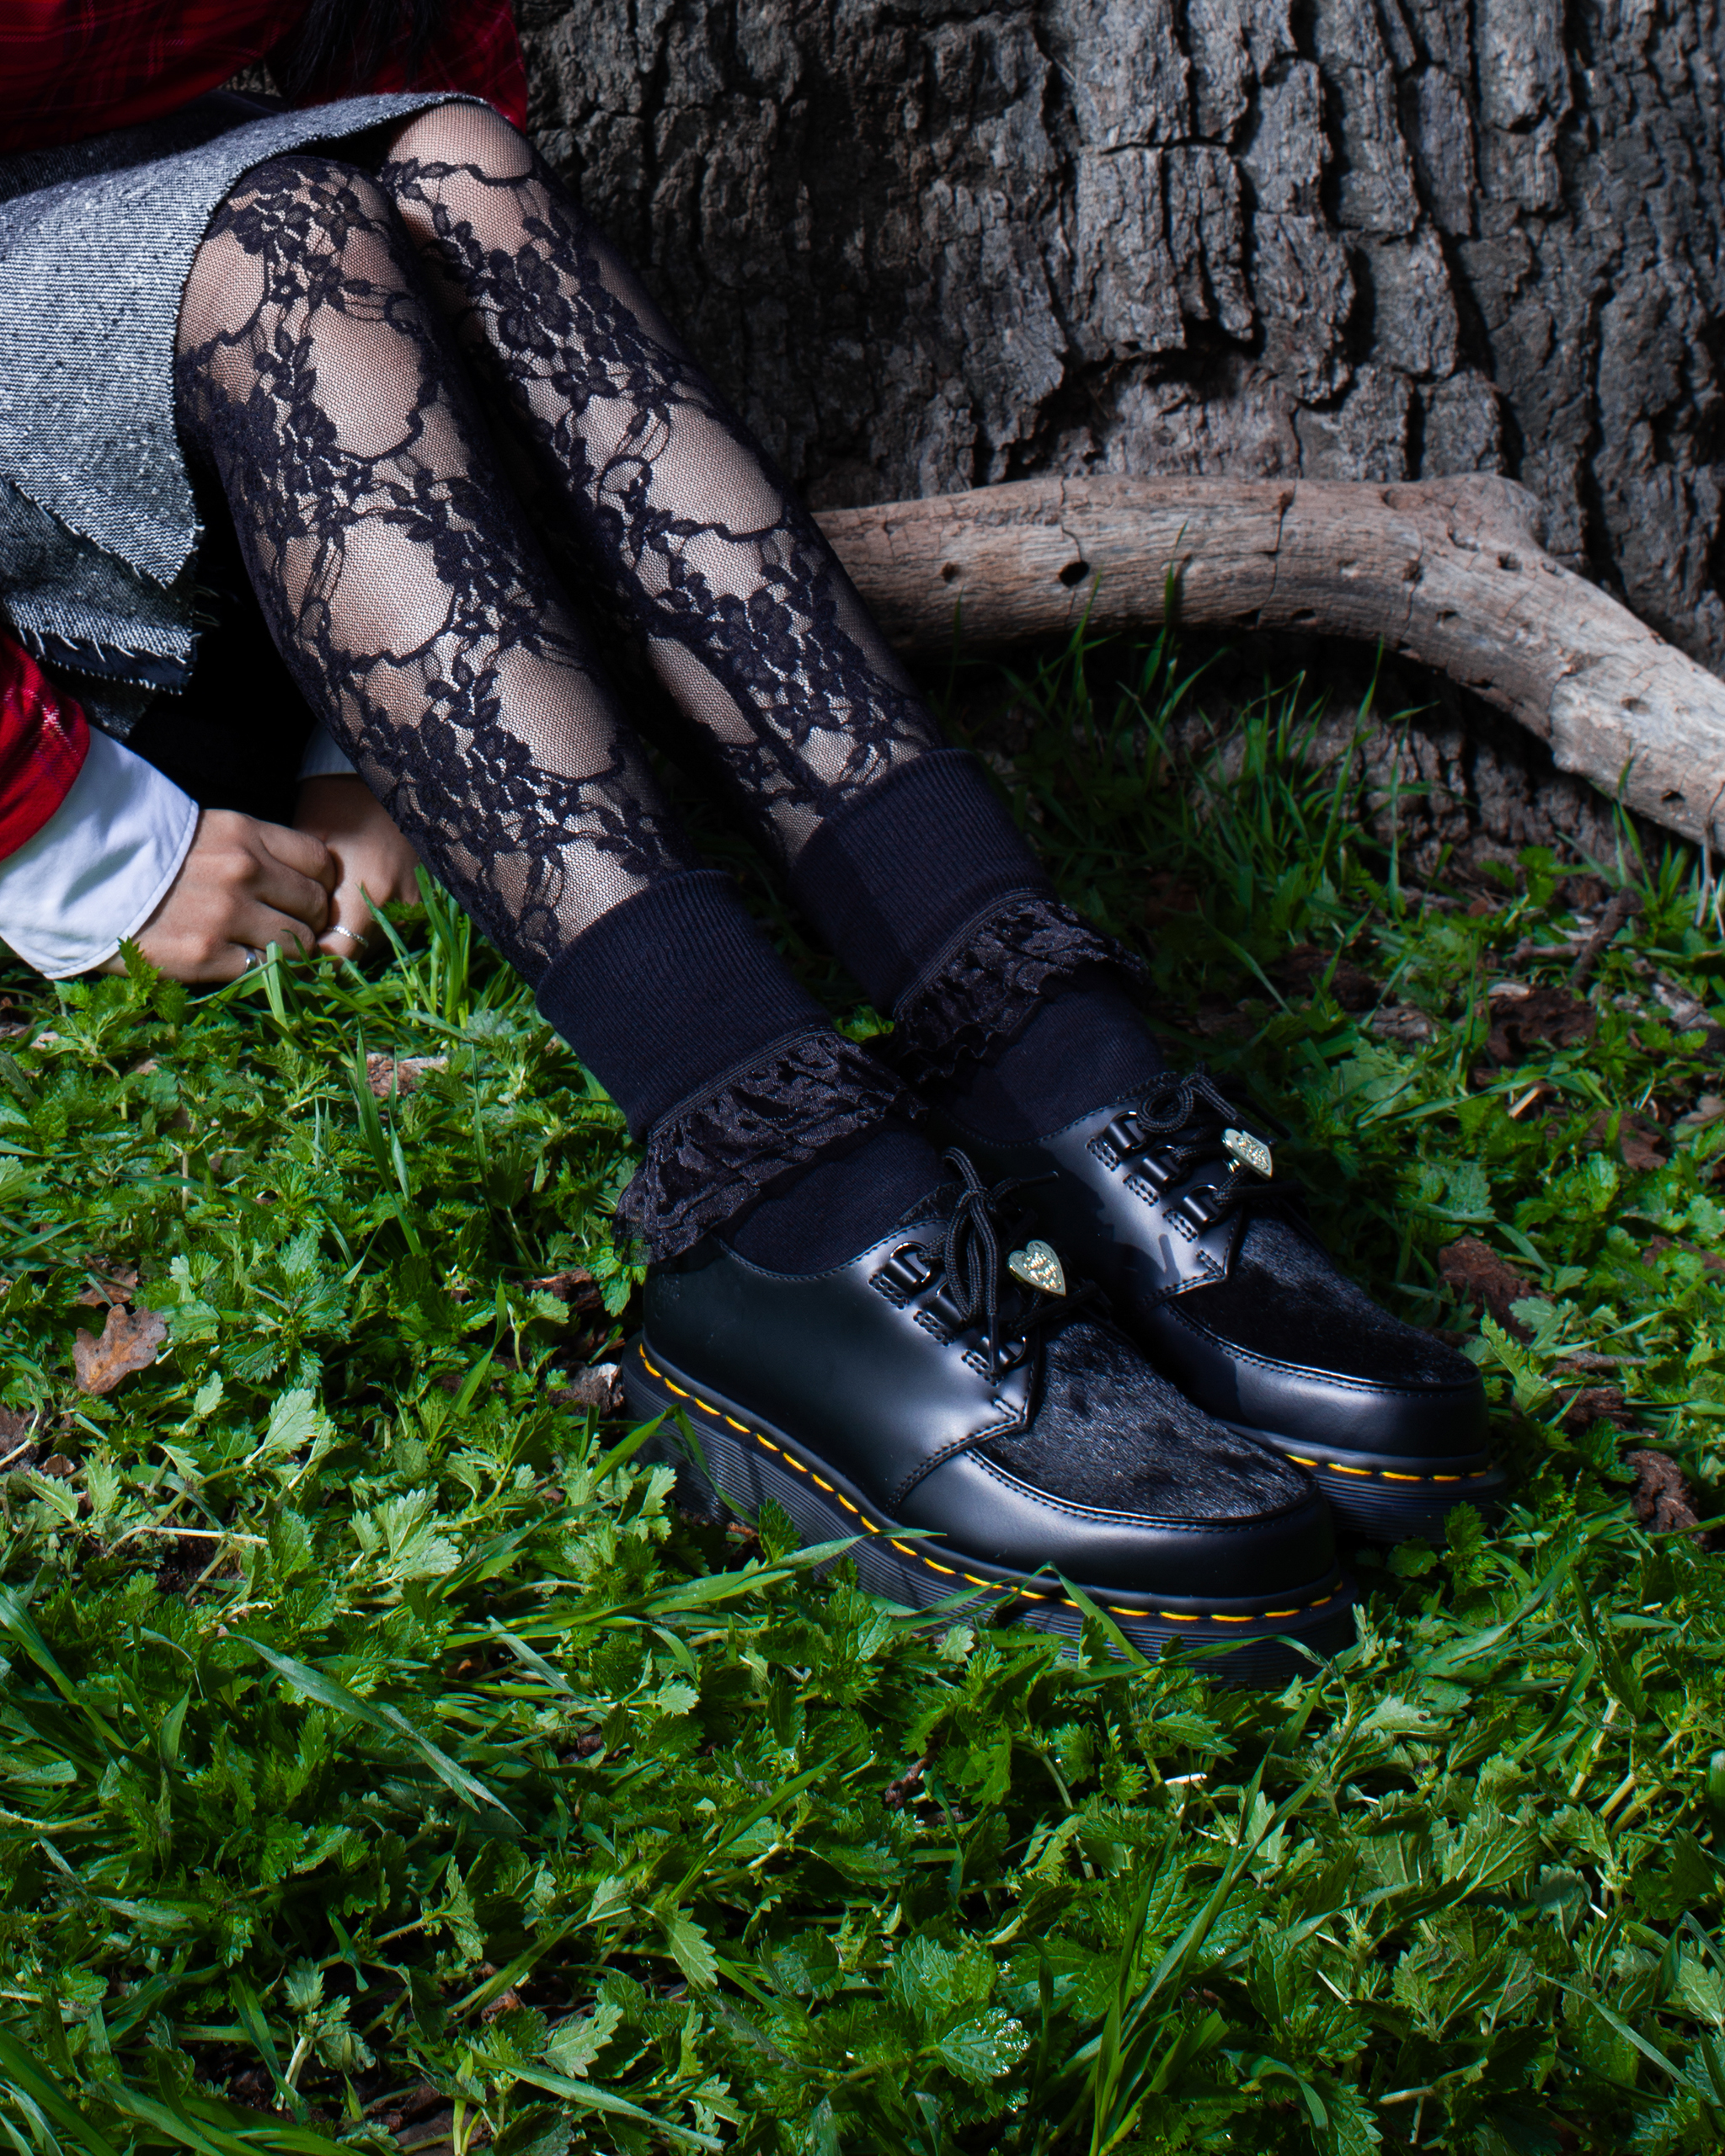 Dr. Martens x Girls Don't Cry - Fashion Trendsetter